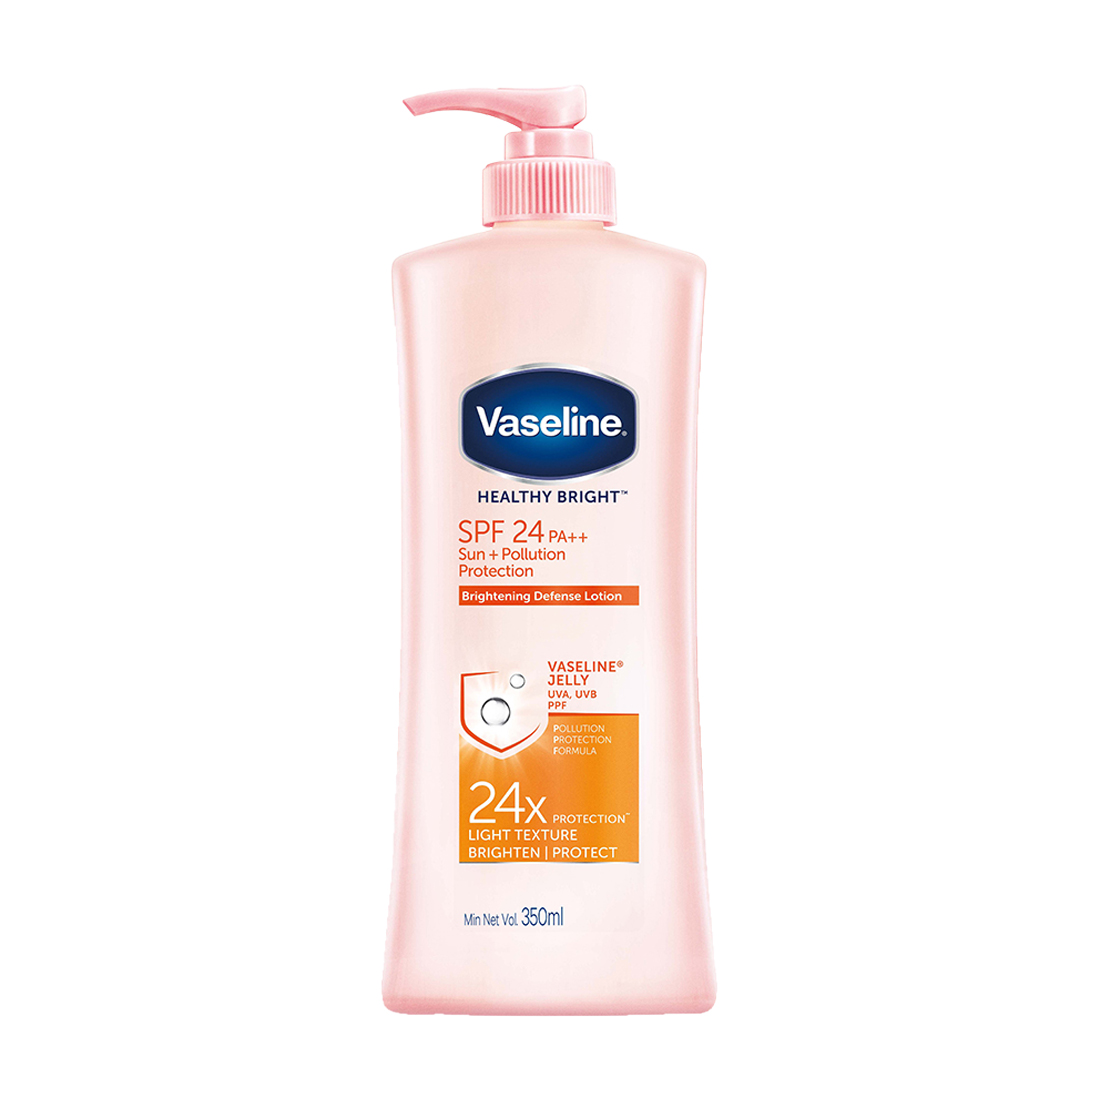 Vaseline Dưỡng Thể Healthy Bright Sun + Pollution Protection Body Lotion SPF 24 PA++ 350ml